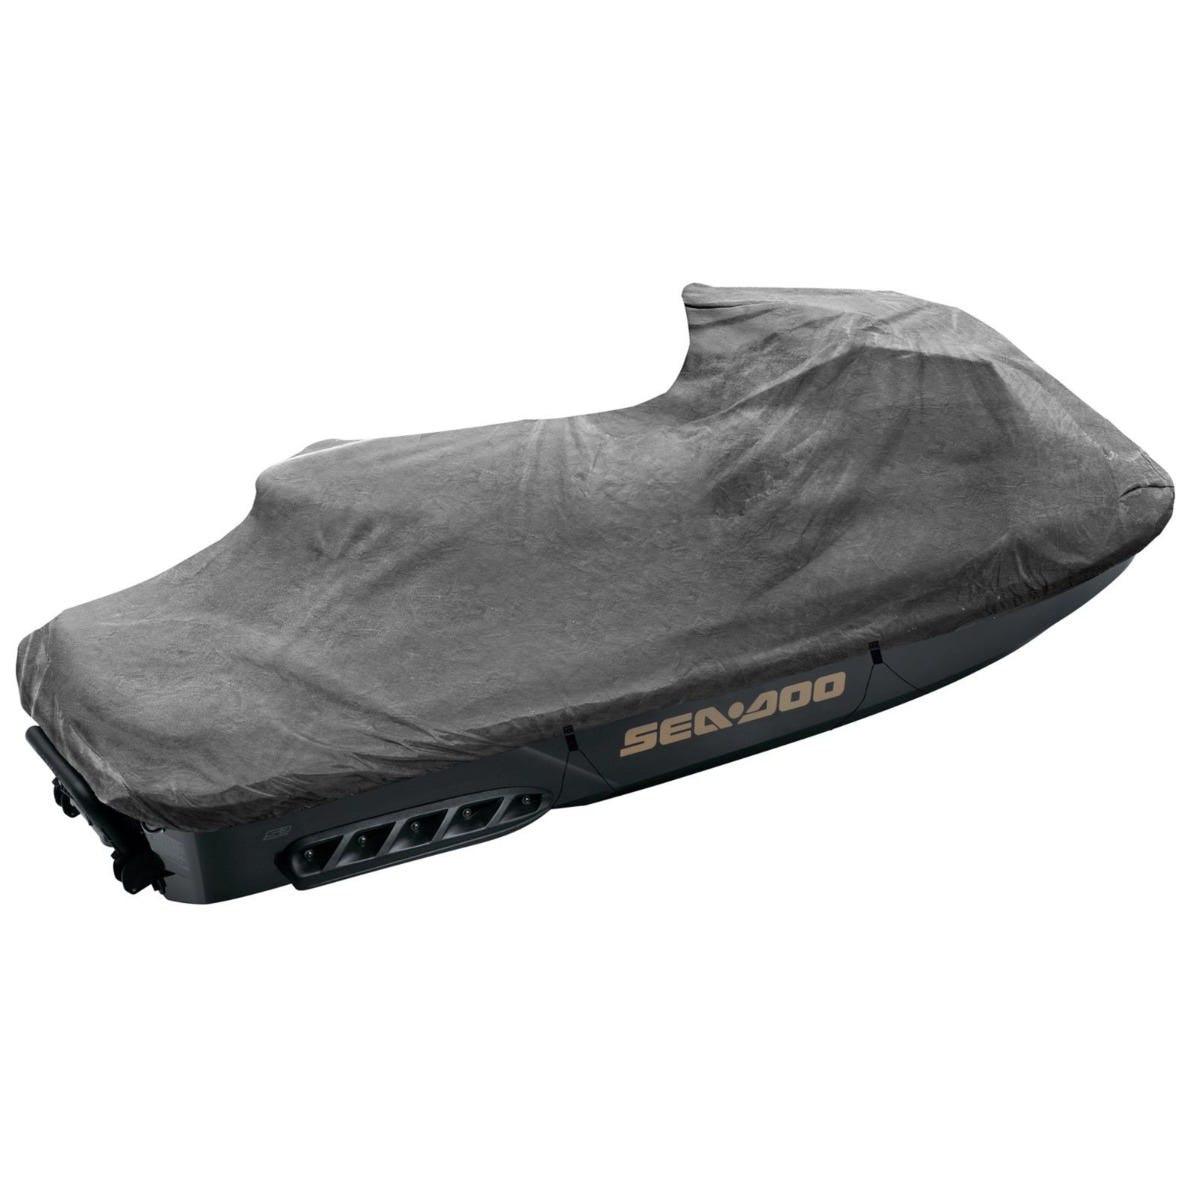 Shop Sea-Doo Covers at Factory Recreation | Factory Recreation